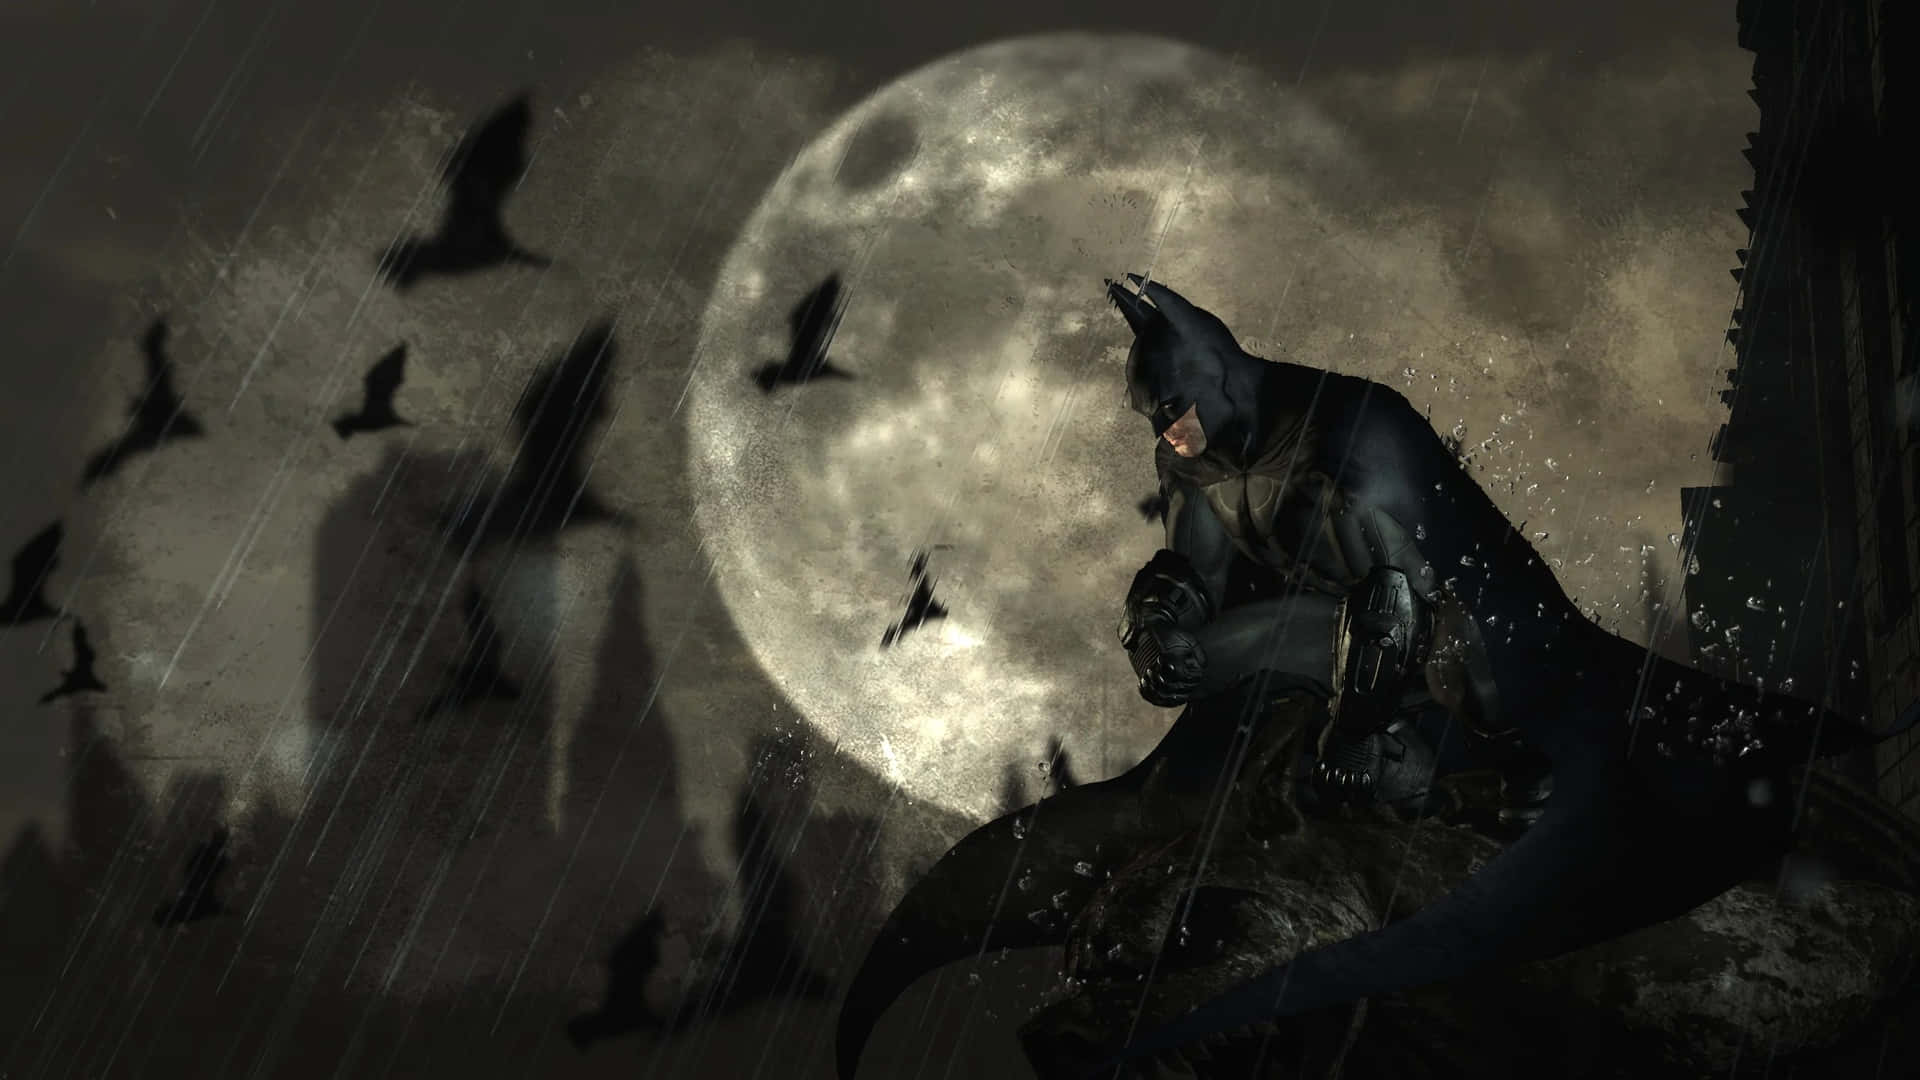 Batman takes the streets in Arkham City